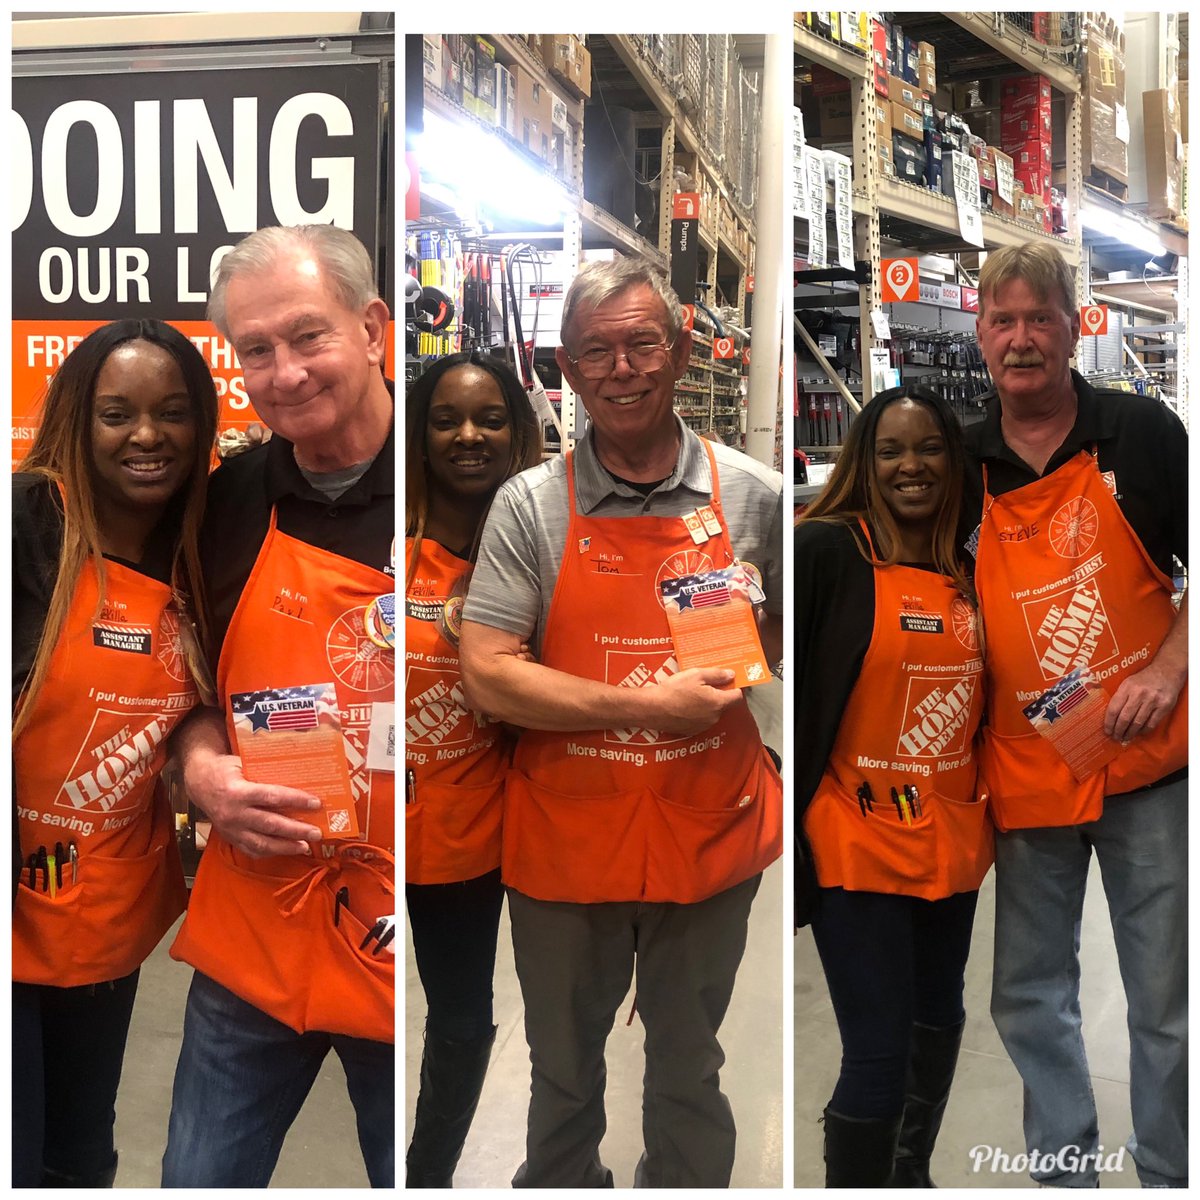 Some more of our veterans at 4181! Thank you for your service Paul, Tom, and Steve!! 🇺🇸🇺🇸 @Bob_Roselli @tekillabrooks #Broomallsbest